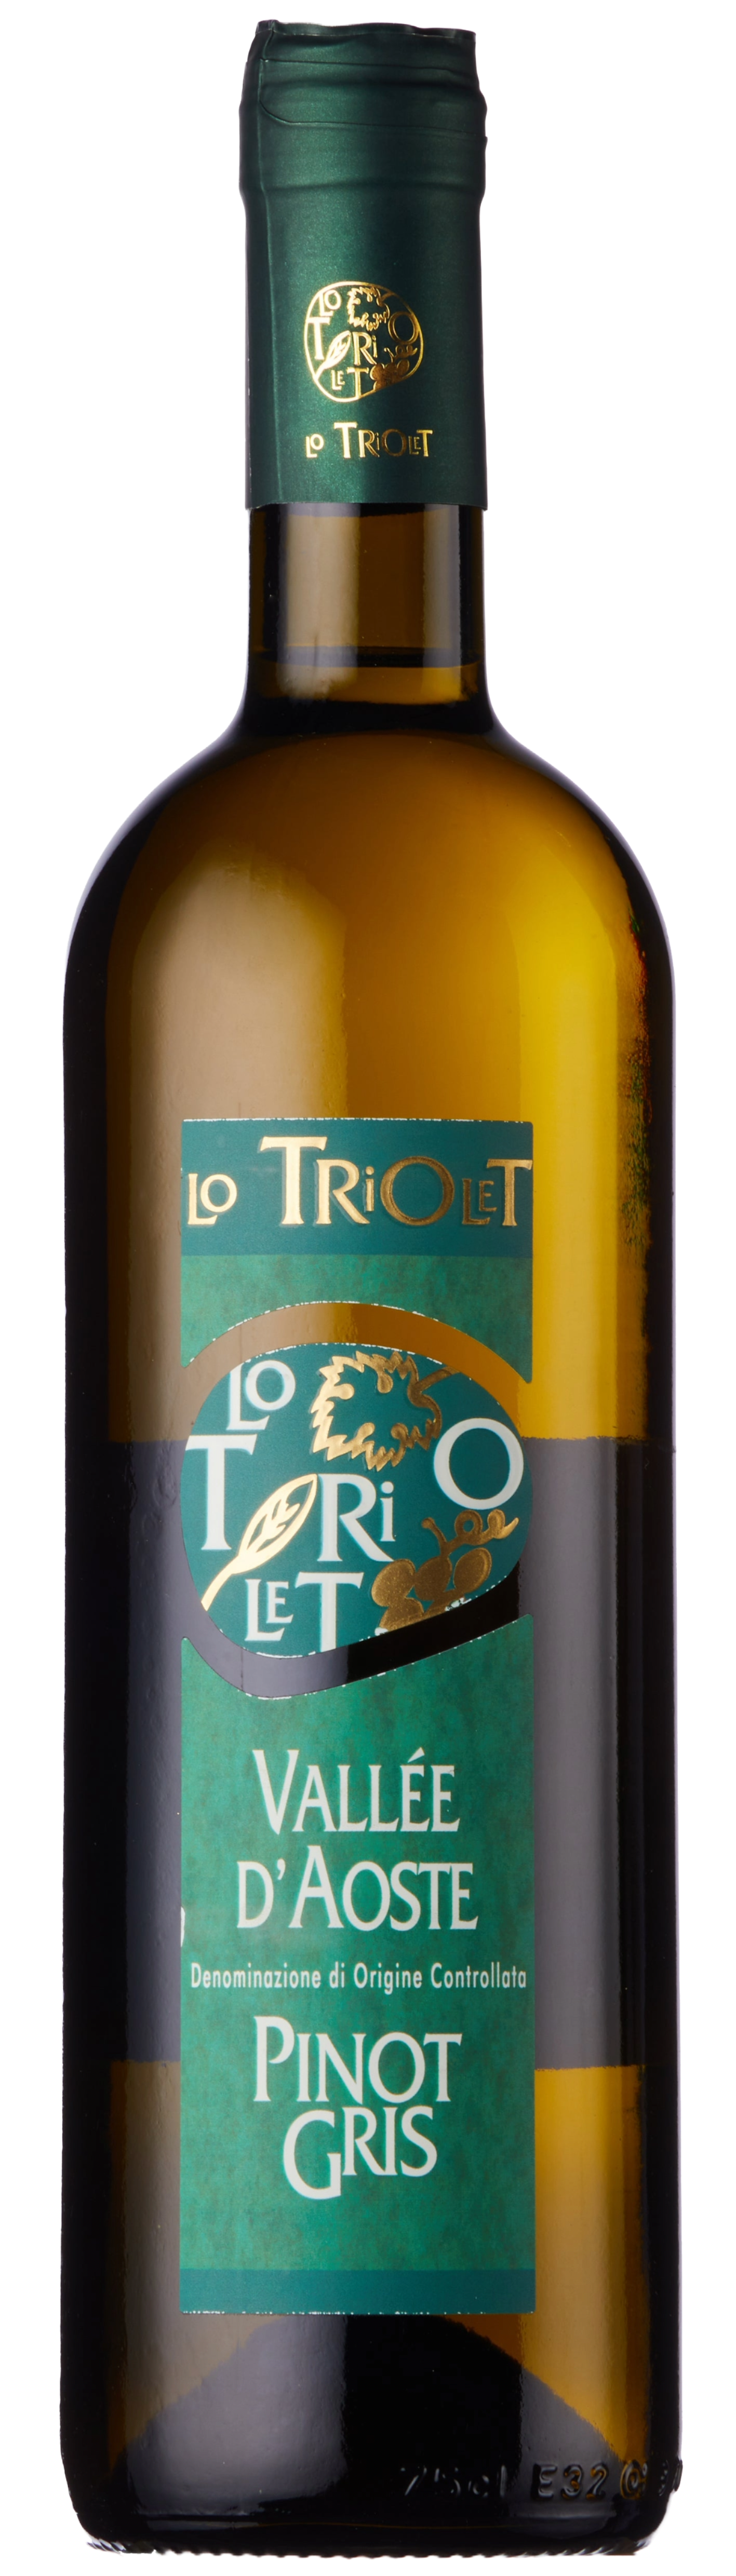 Lo Triolet Vallee dAoste Pinot Gris Barriques 2019